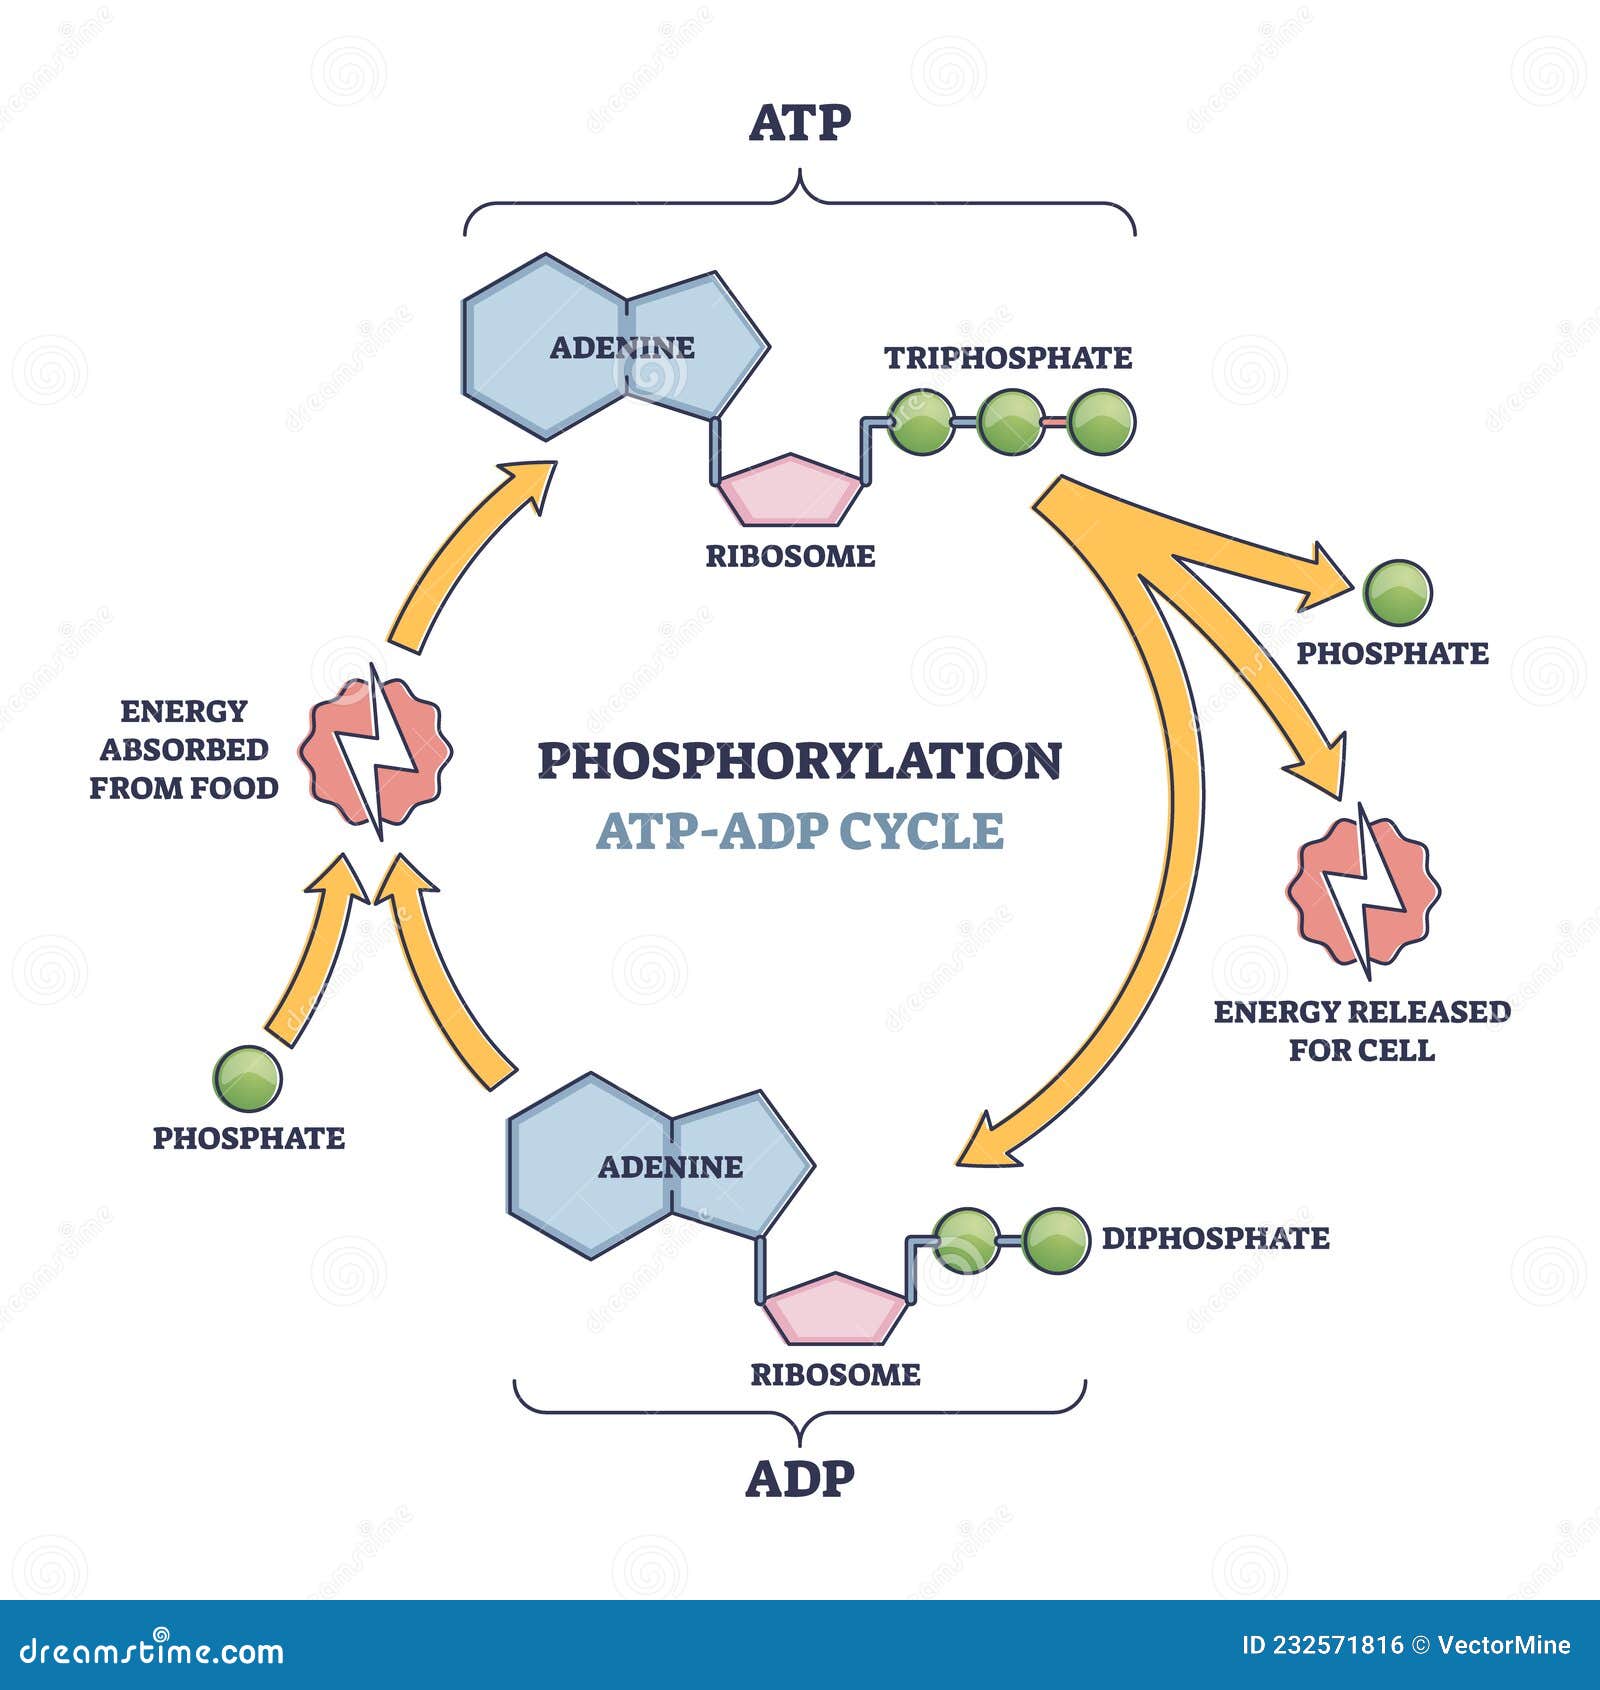 phosphorylation atp, adp cycle with detailed process stages outline diagram